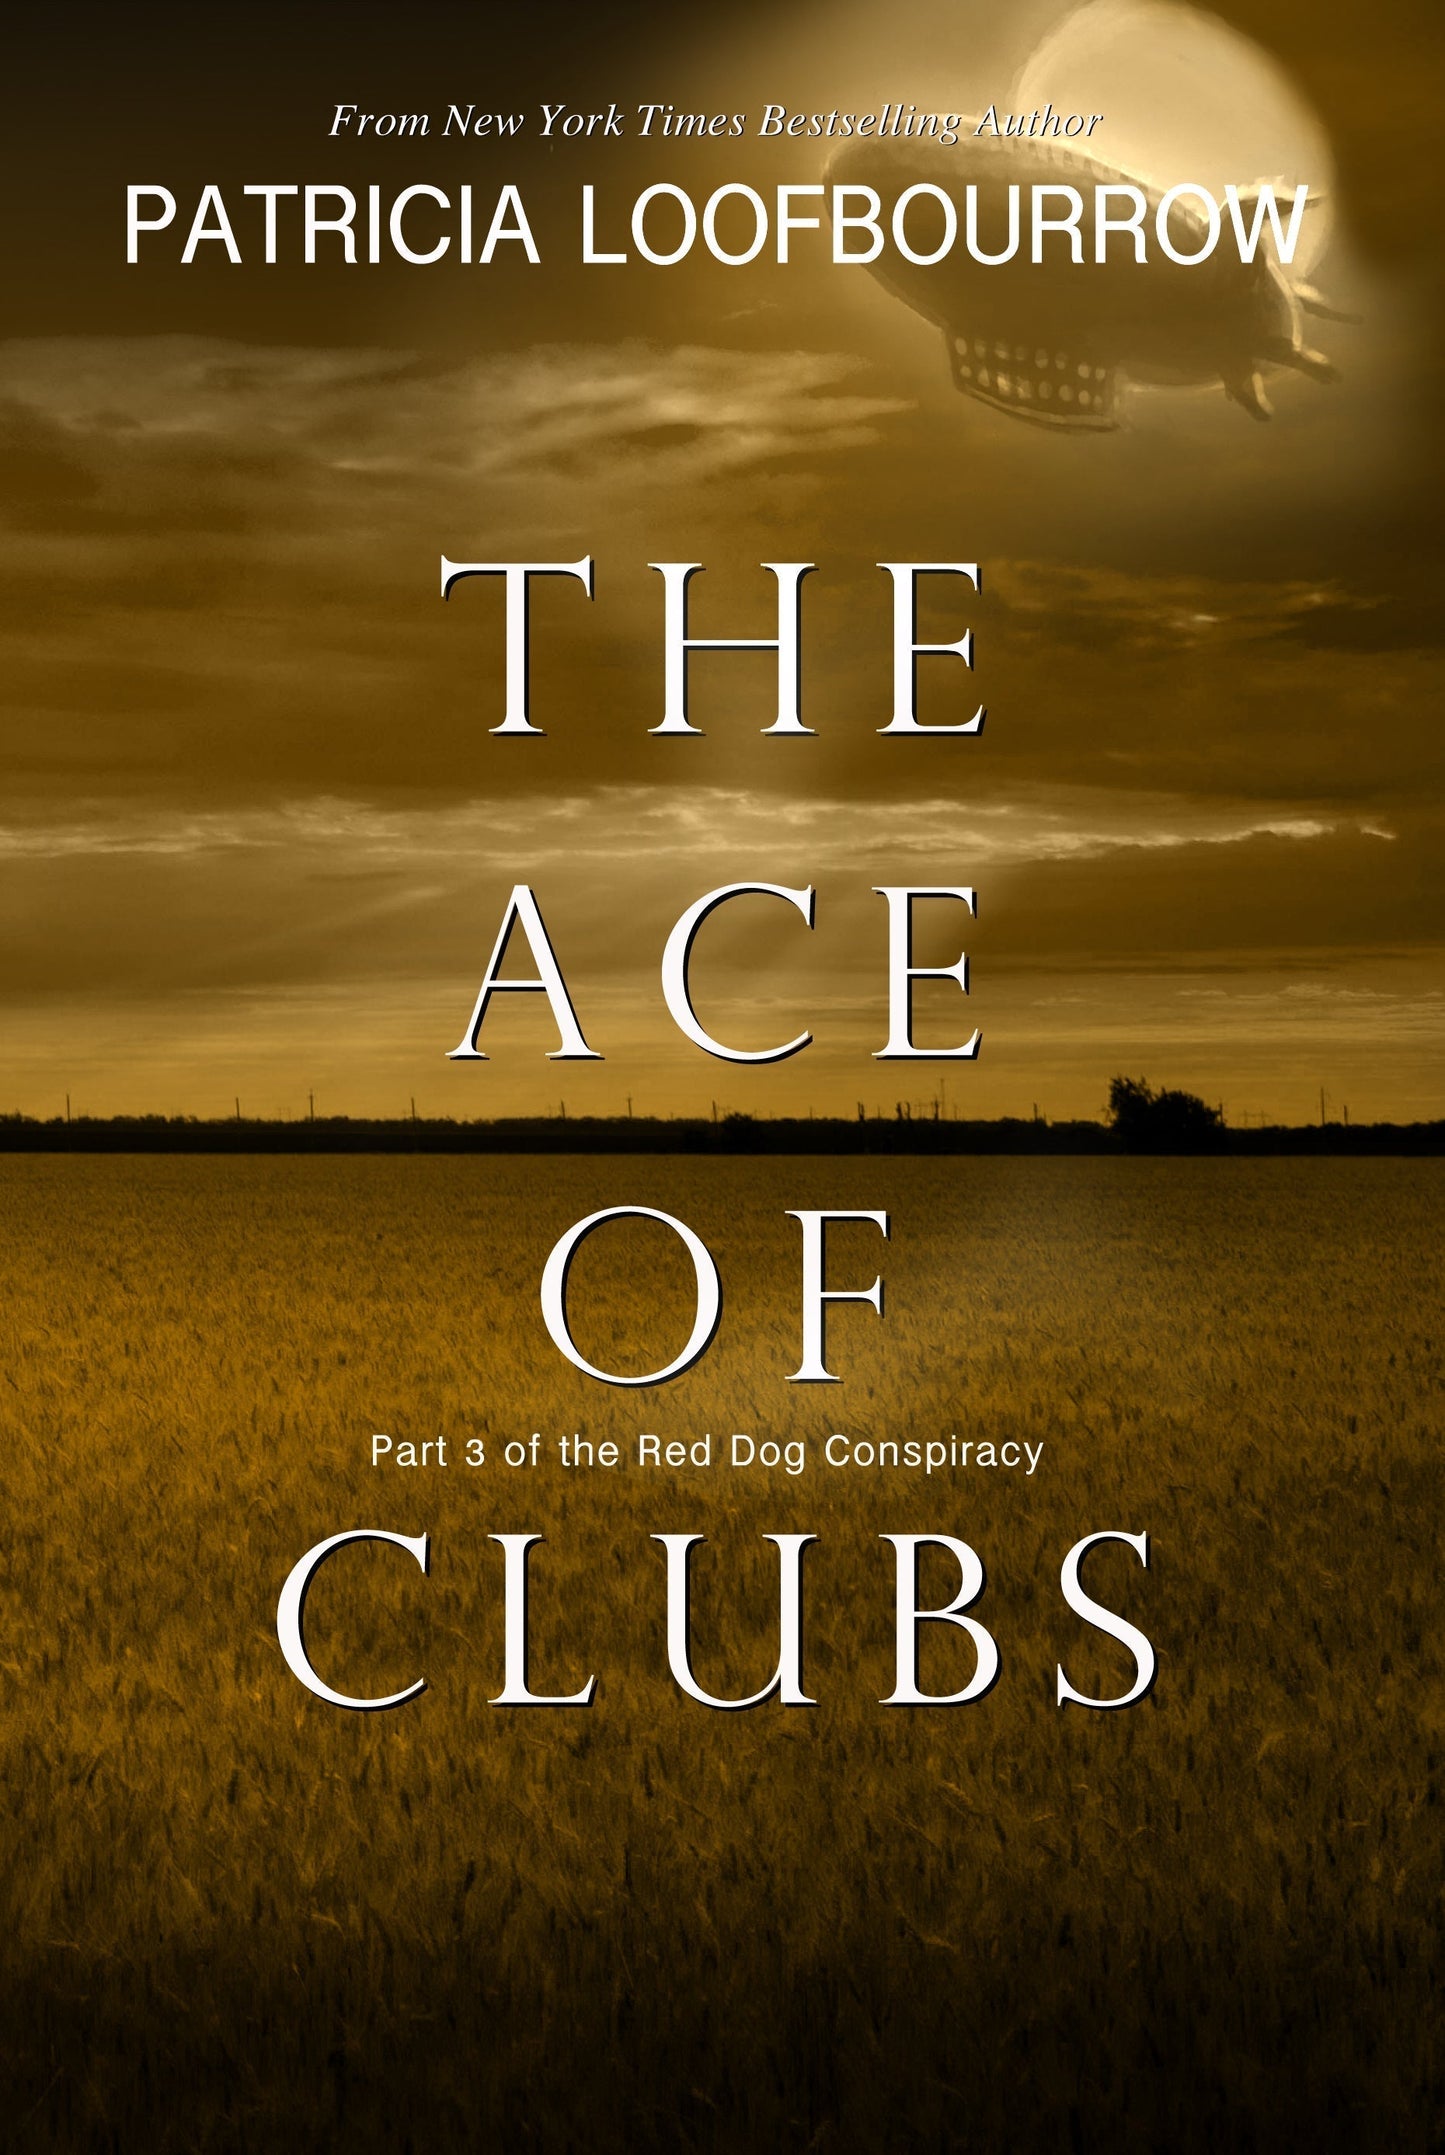 The Ace of Clubs [signed hardcover] - PatriciaLoofbourrow